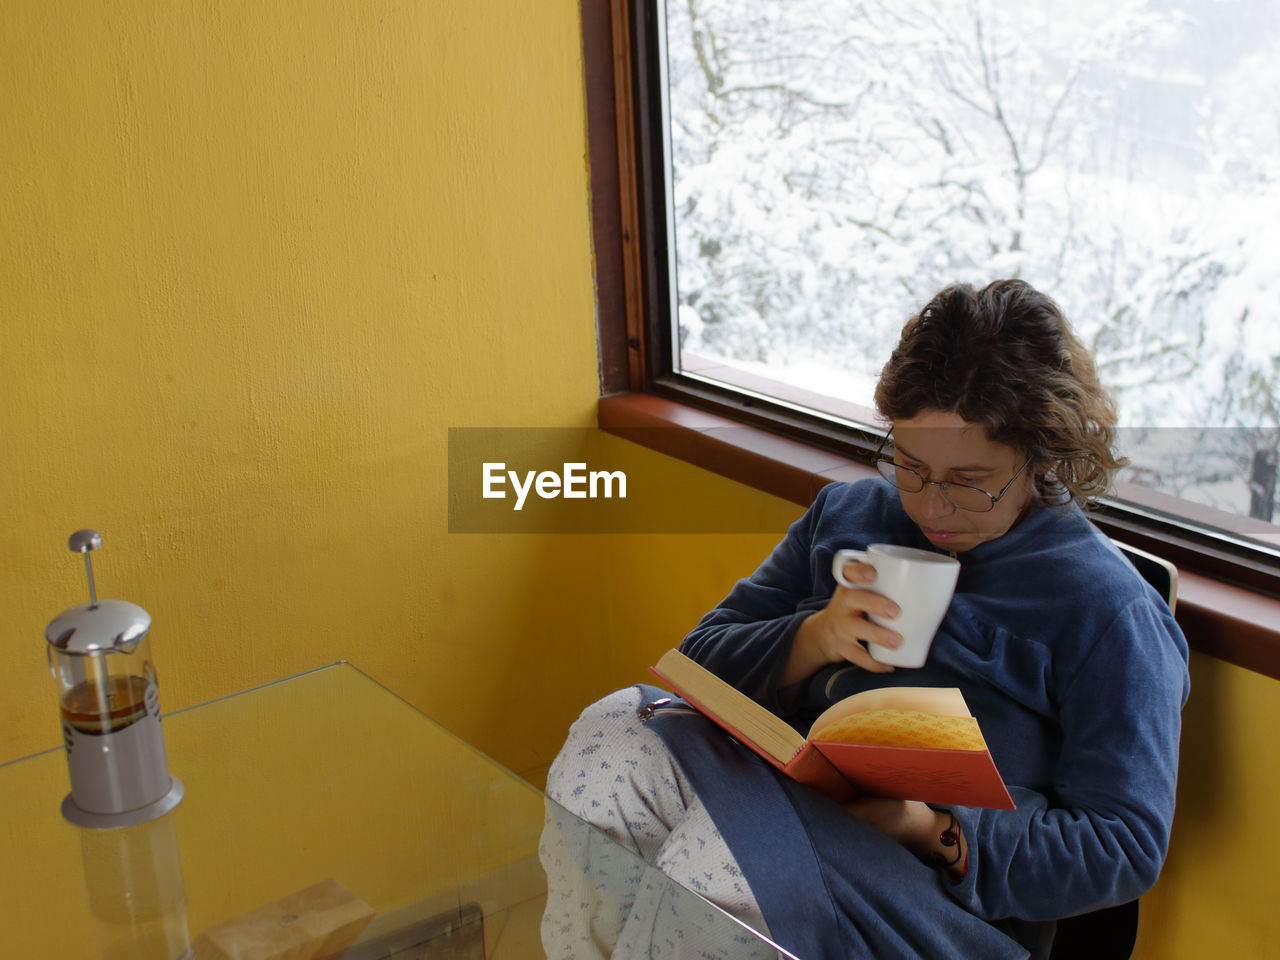 A caucasian woman in her pajamas drinks a cup of tea in front of the window as it snows outside